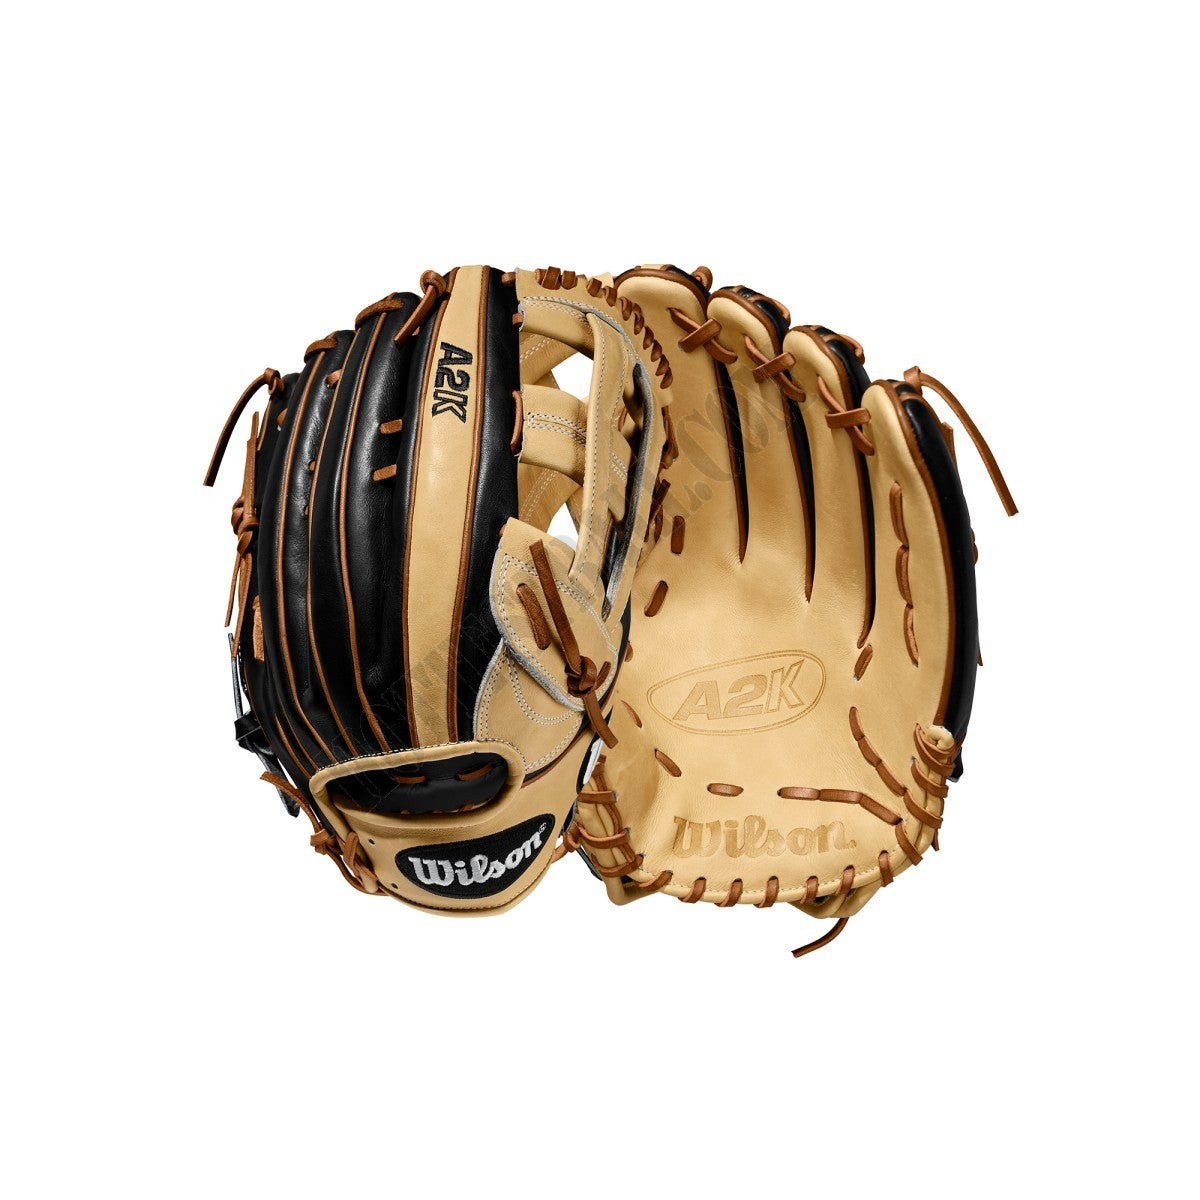 2020 A2K 1799 12.75" Outfield Baseball Glove ● Wilson Promotions - 2020 A2K 1799 12.75" Outfield Baseball Glove ● Wilson Promotions